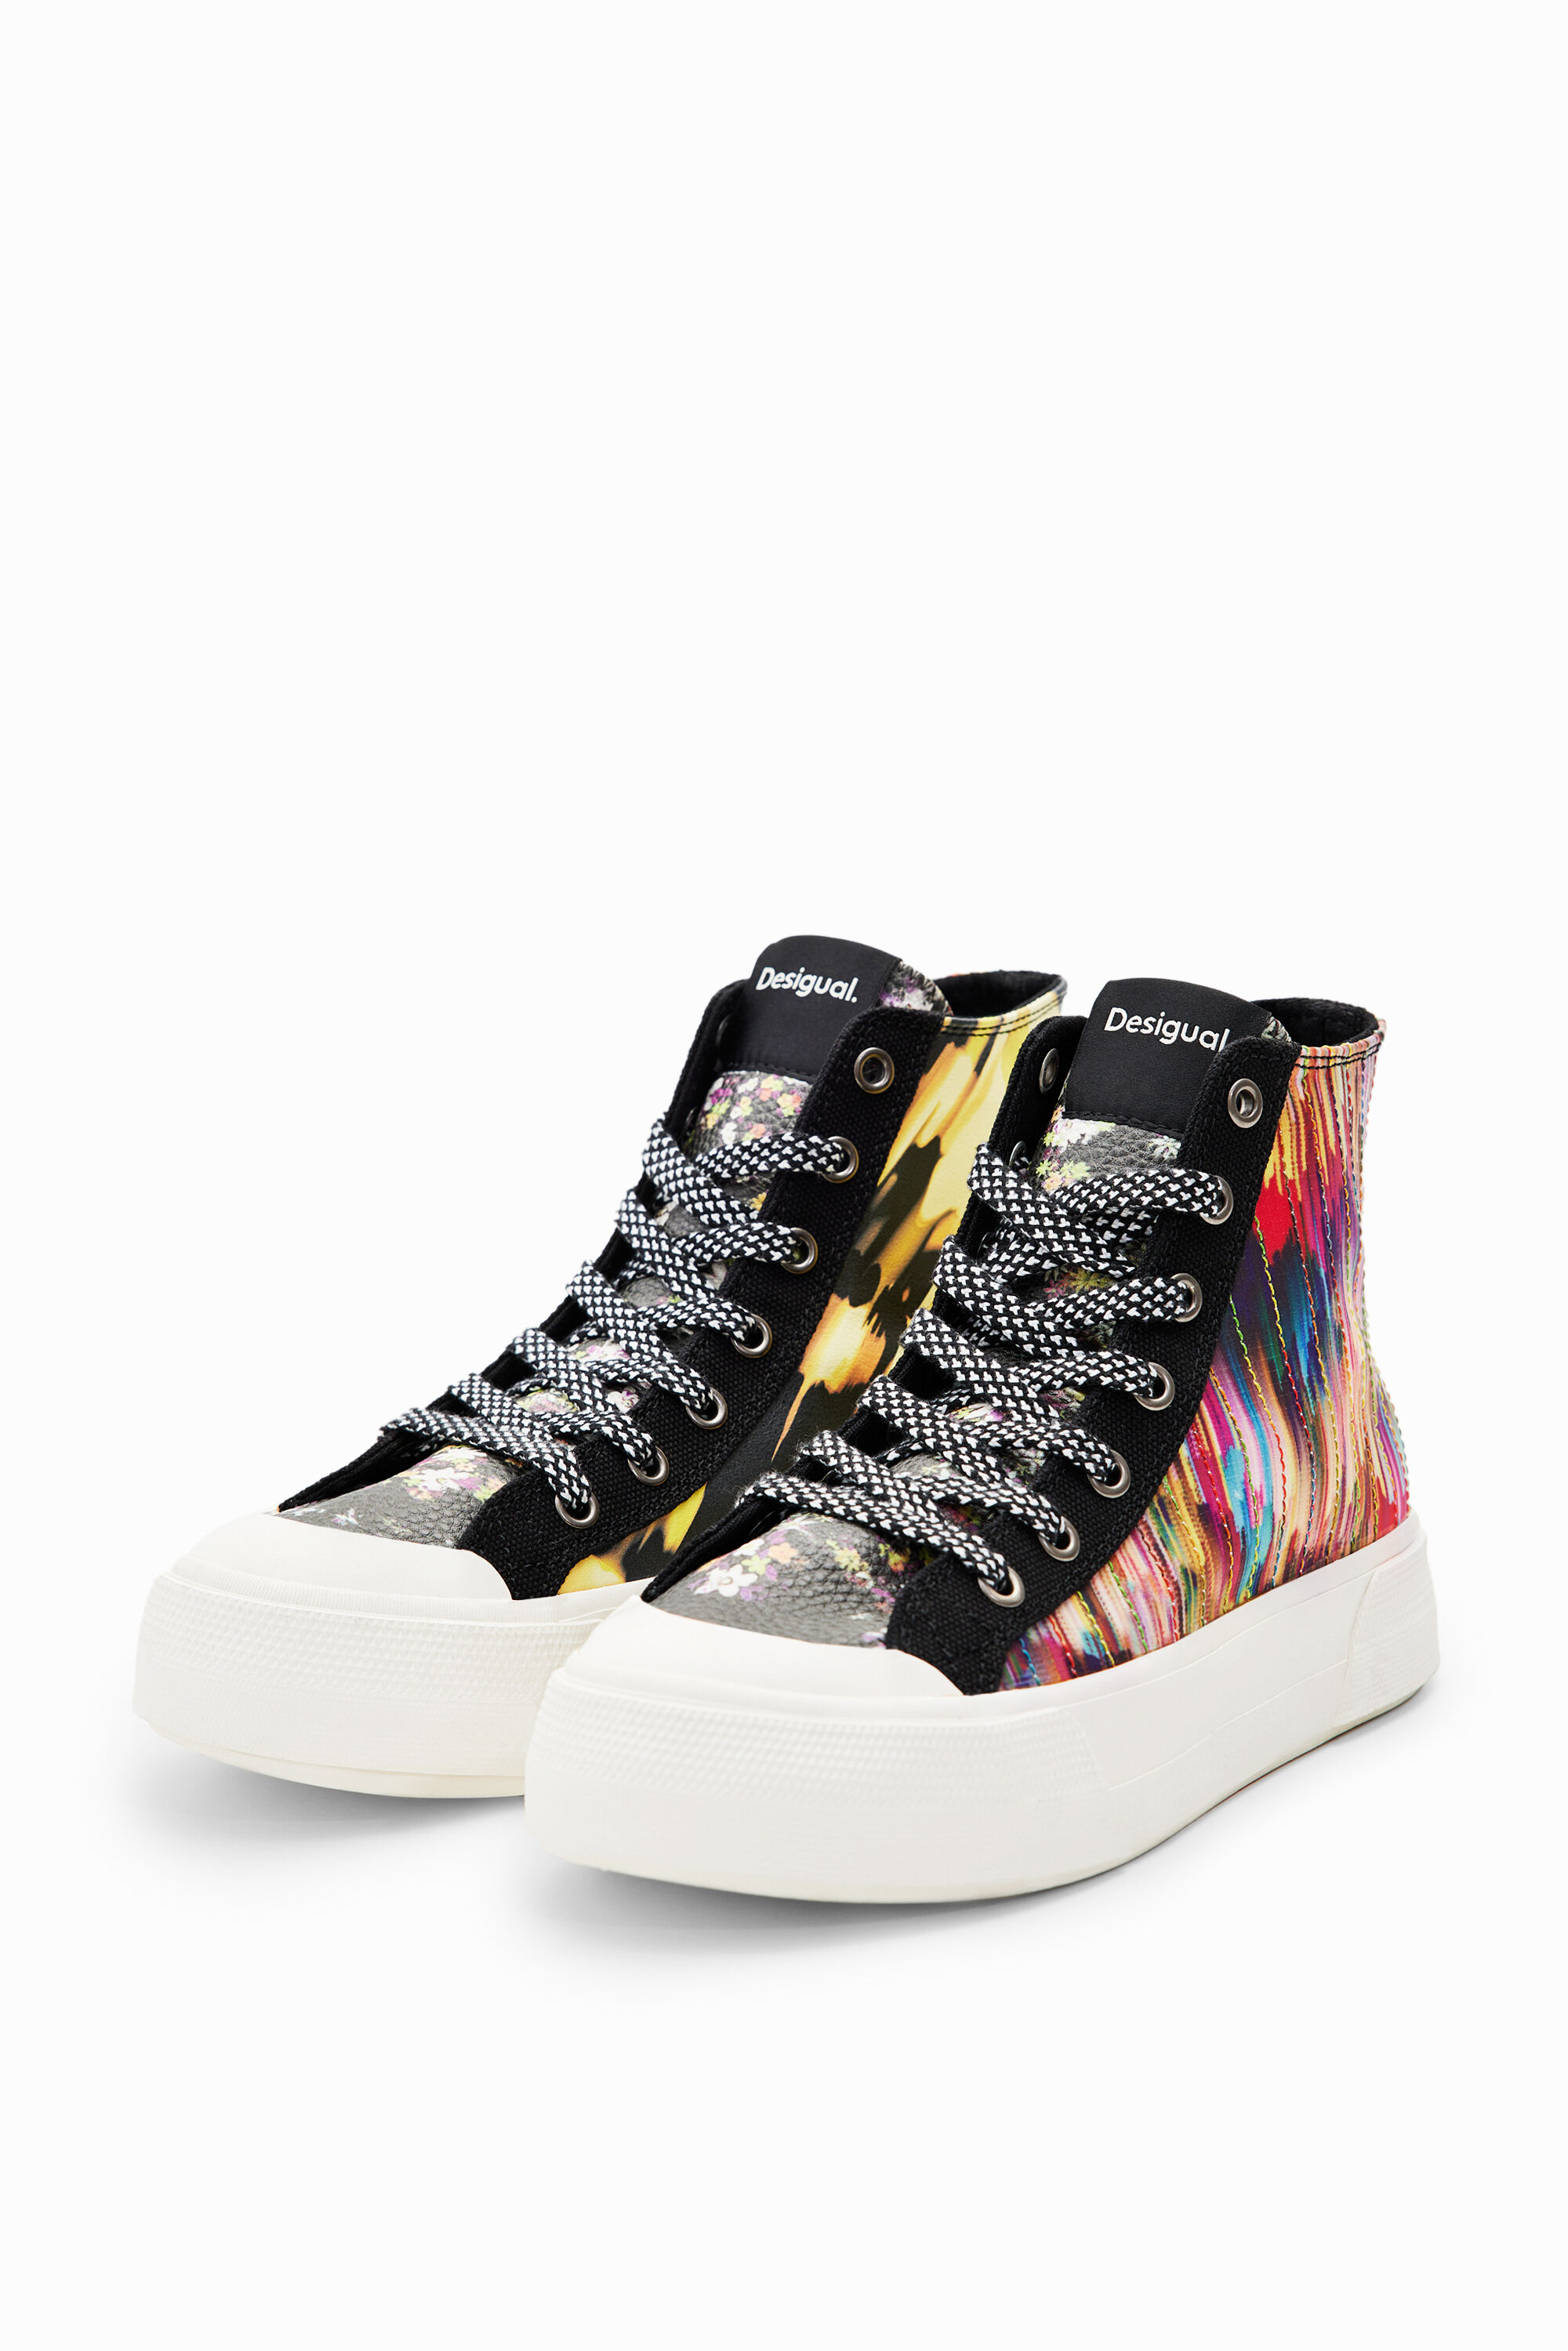 High-top glitch patchwork sneakers - MATERIAL FINISHES - 40